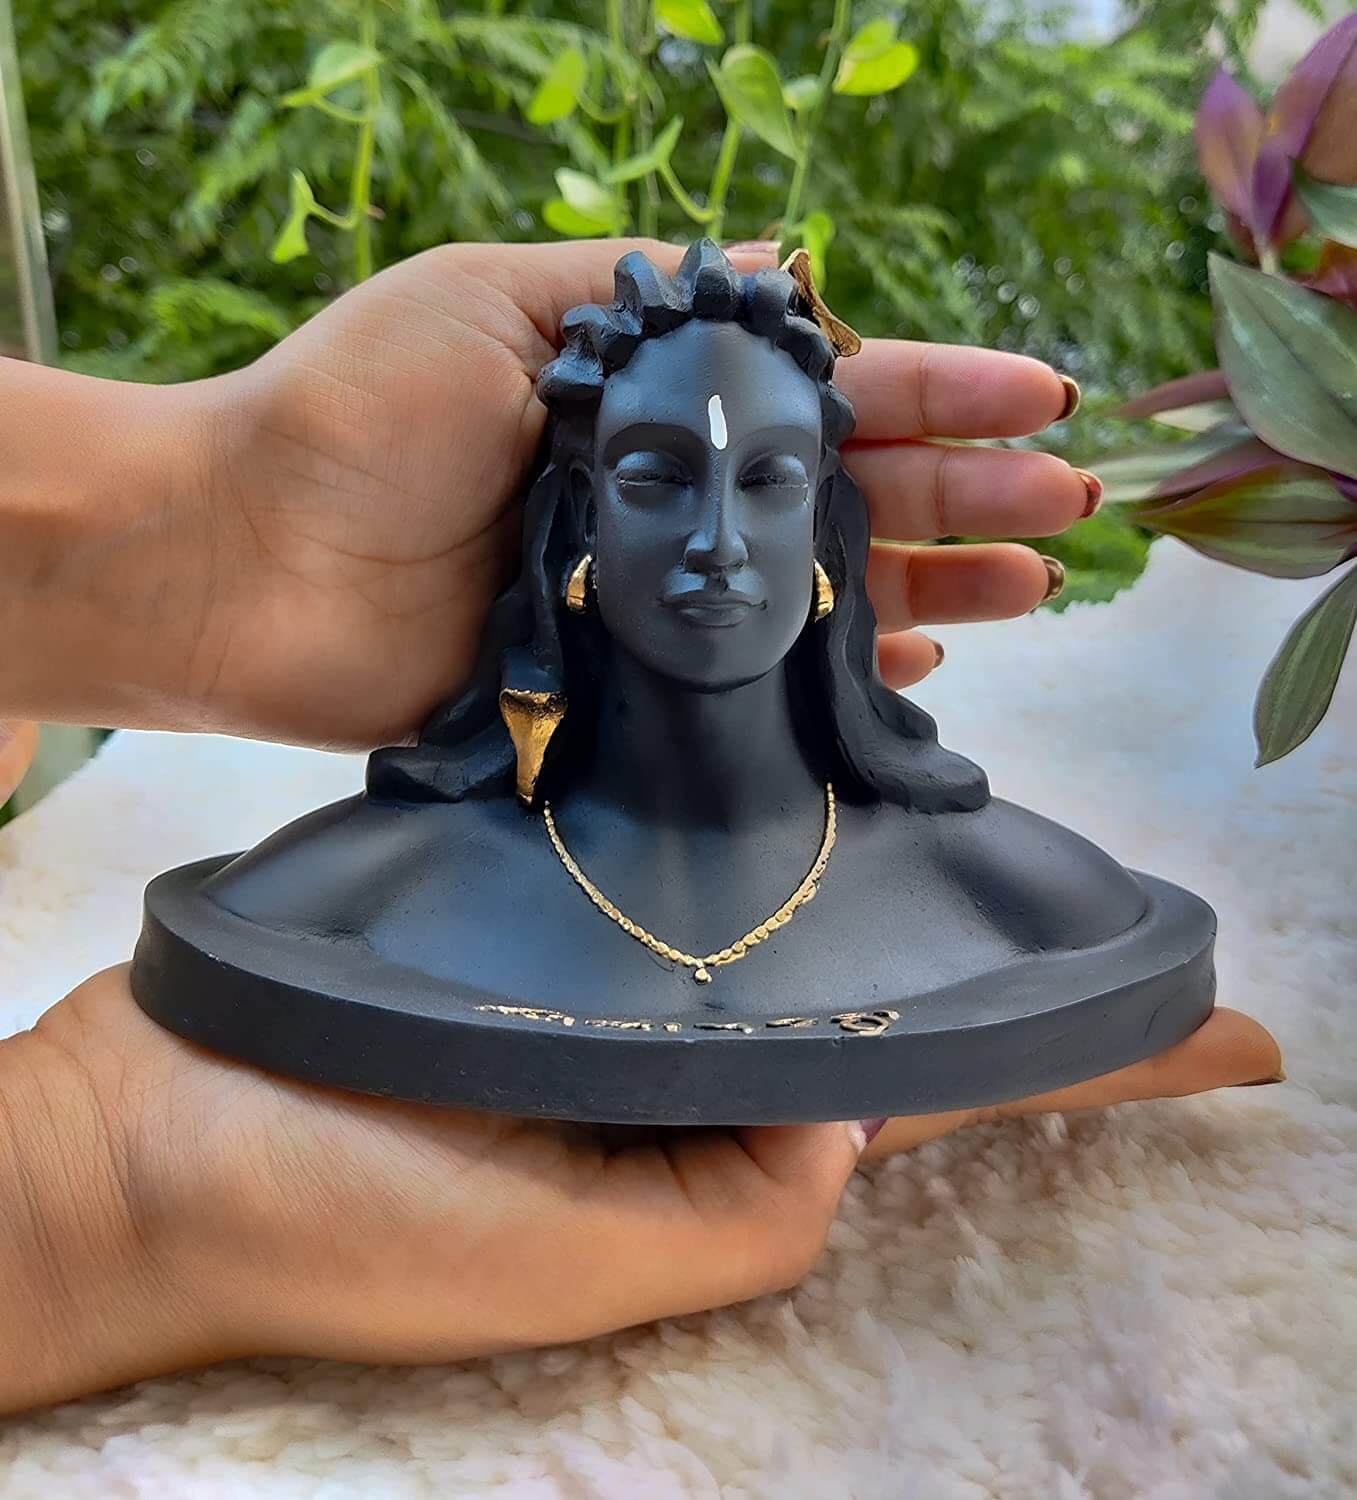 https://mangalfashions.com/cdn/shop/products/5-5-inch-Adiyogi-Statue-with-Rudraksha-Mala-for-Car-Accessories-for-Dash-Board-Pooja-Gift-Decor-Items-for-Home-Office-Mangal-Fashions-Indian-Home-Decor-and-Craft-781.jpg?v=1681631391&width=1445